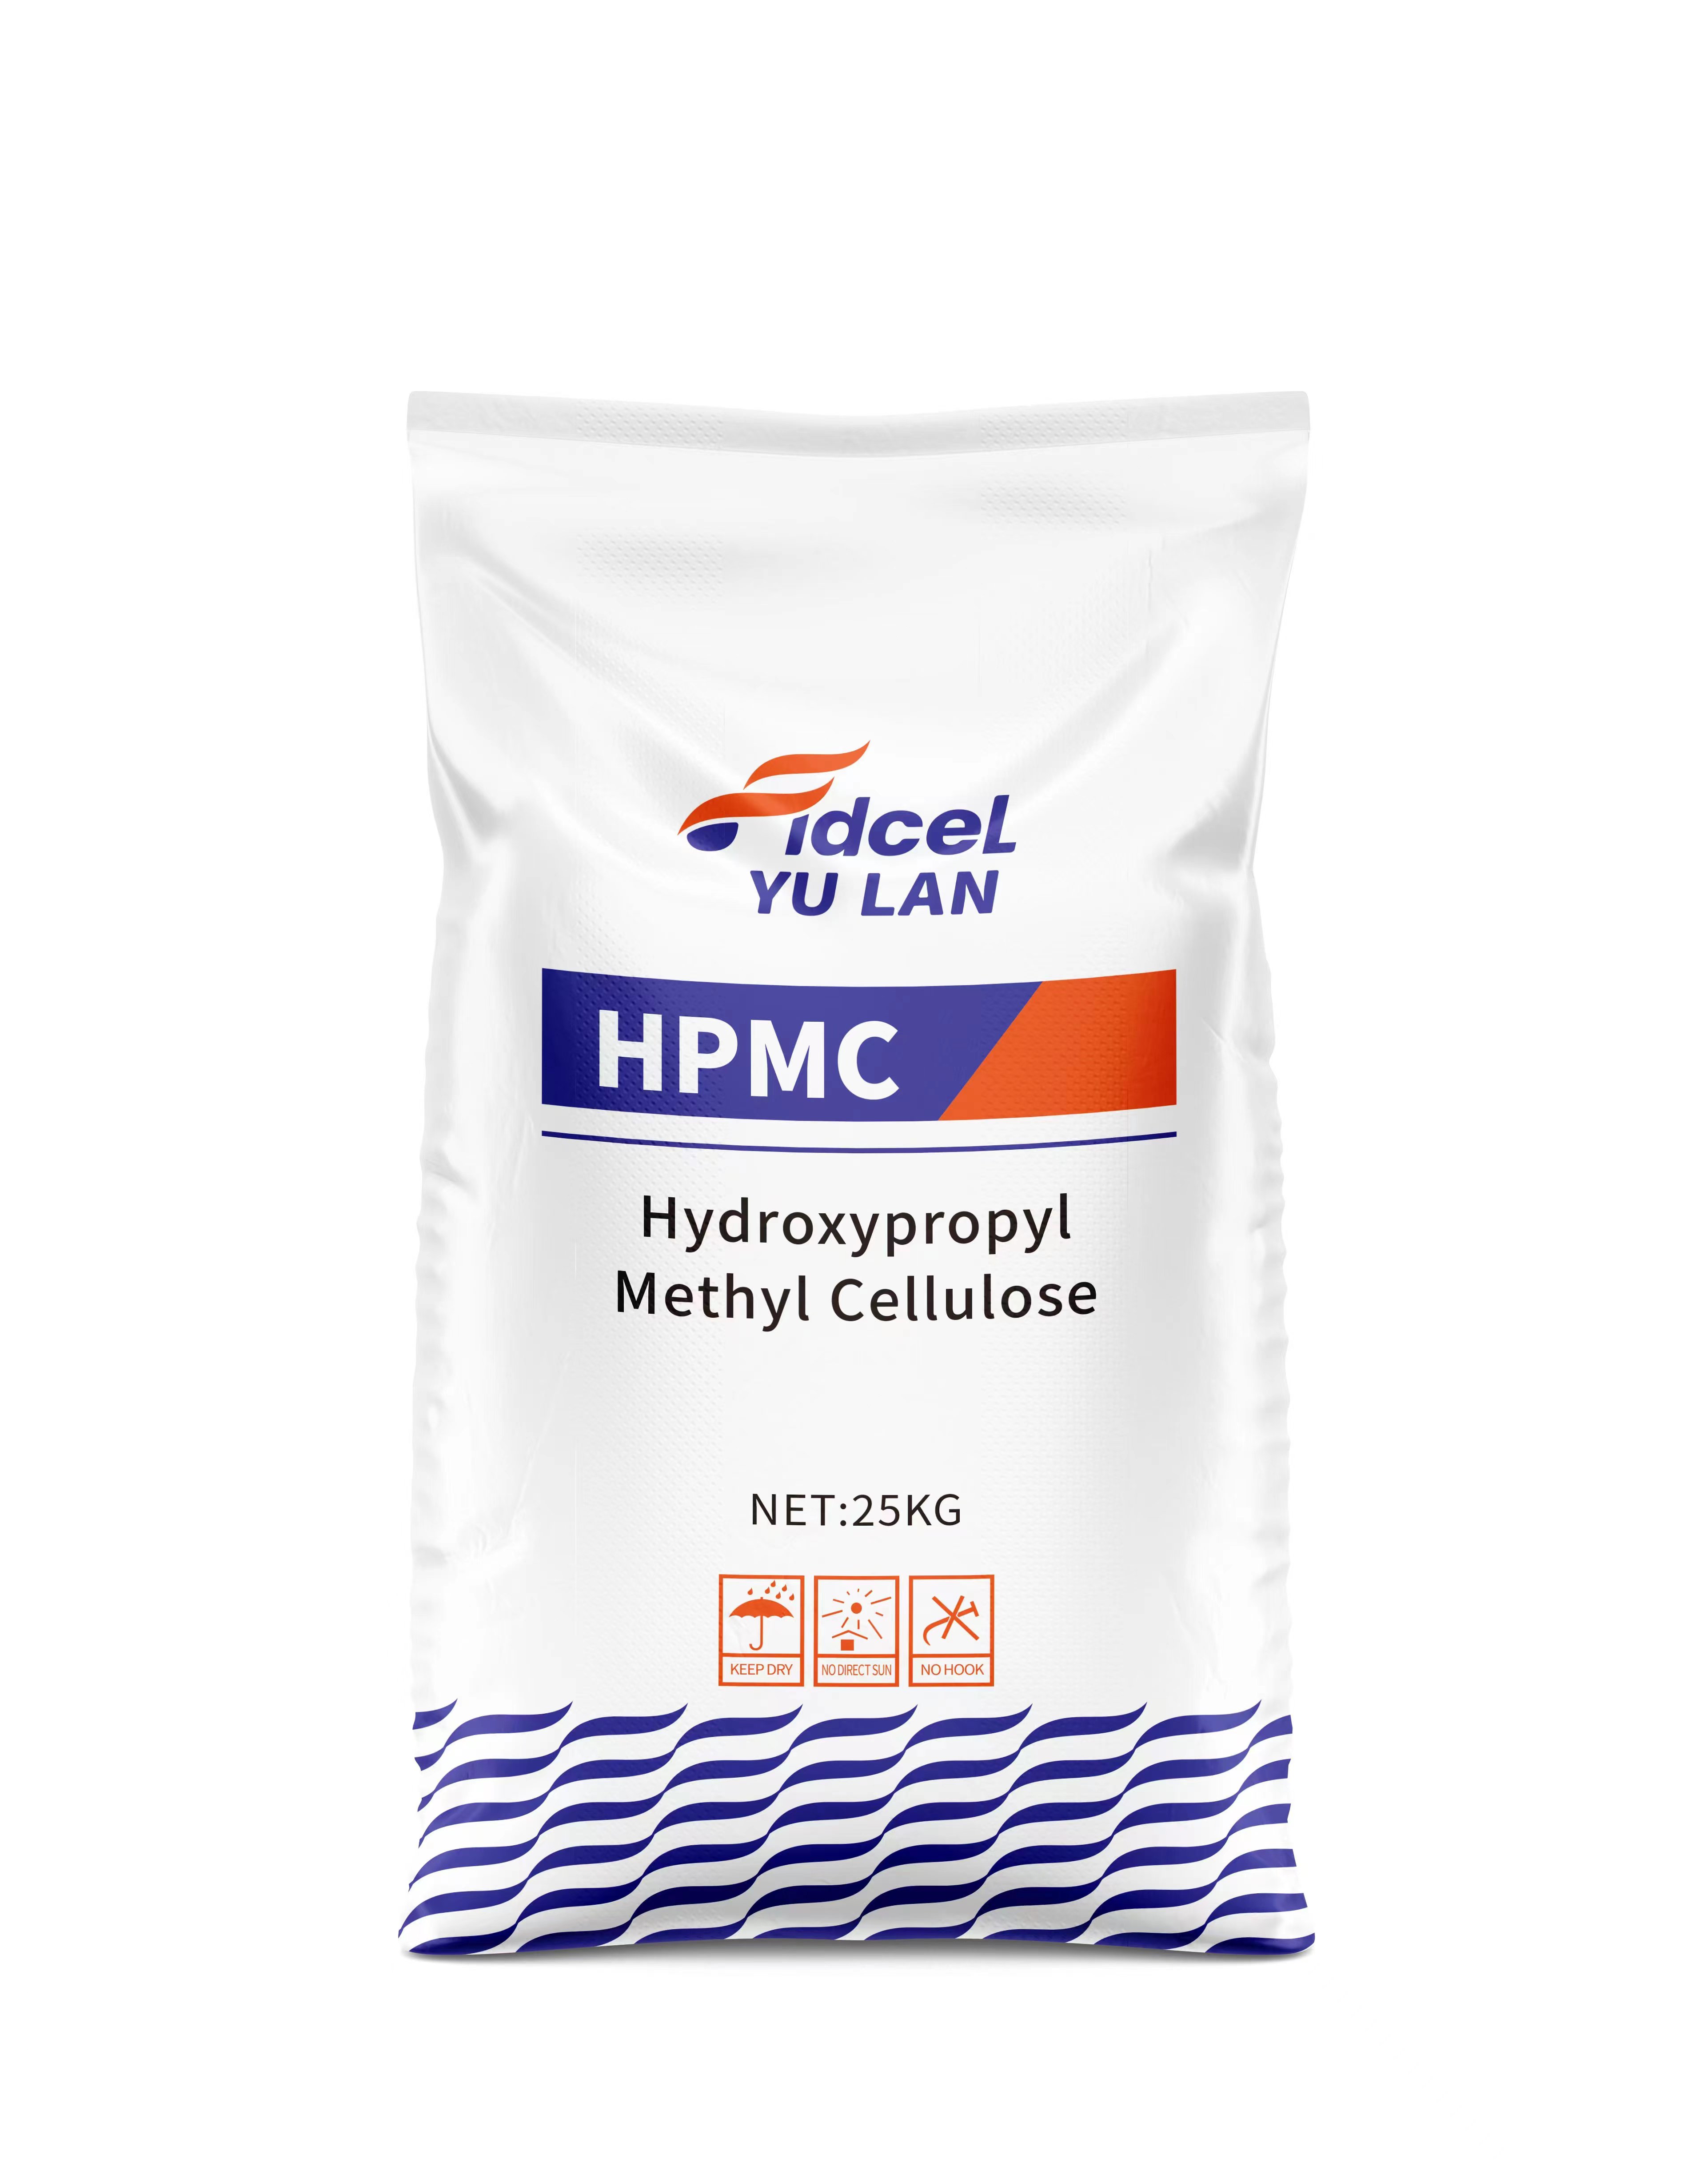 HPMC Exterior Wall Insulation System Mortar Additives Hydroxy Propyl Methyl Cellulose